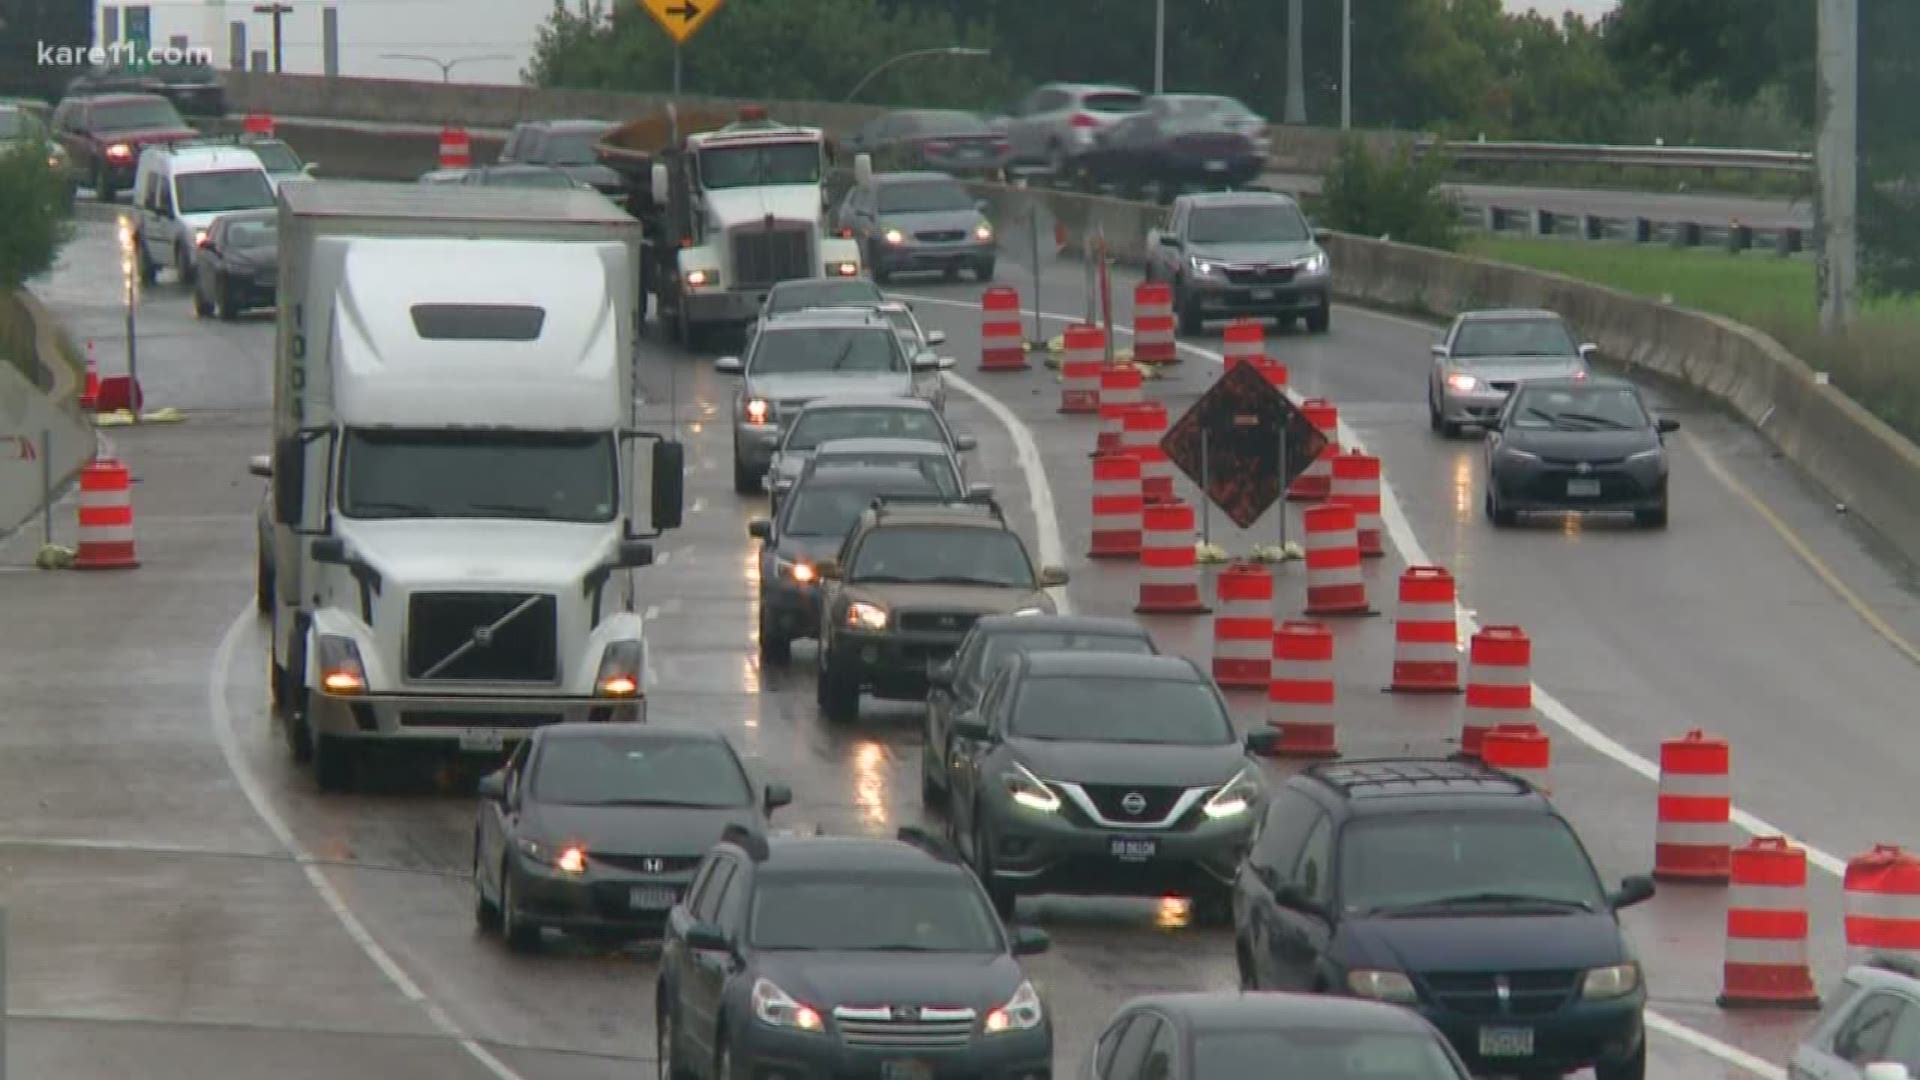 Over the past few days drivers have dealt with several wet commutes in the metro, but did you ever wonder why the rain slows down traffic? KARE 11's Gordon Severson looks into it. https://kare11.tv/2xuDki0